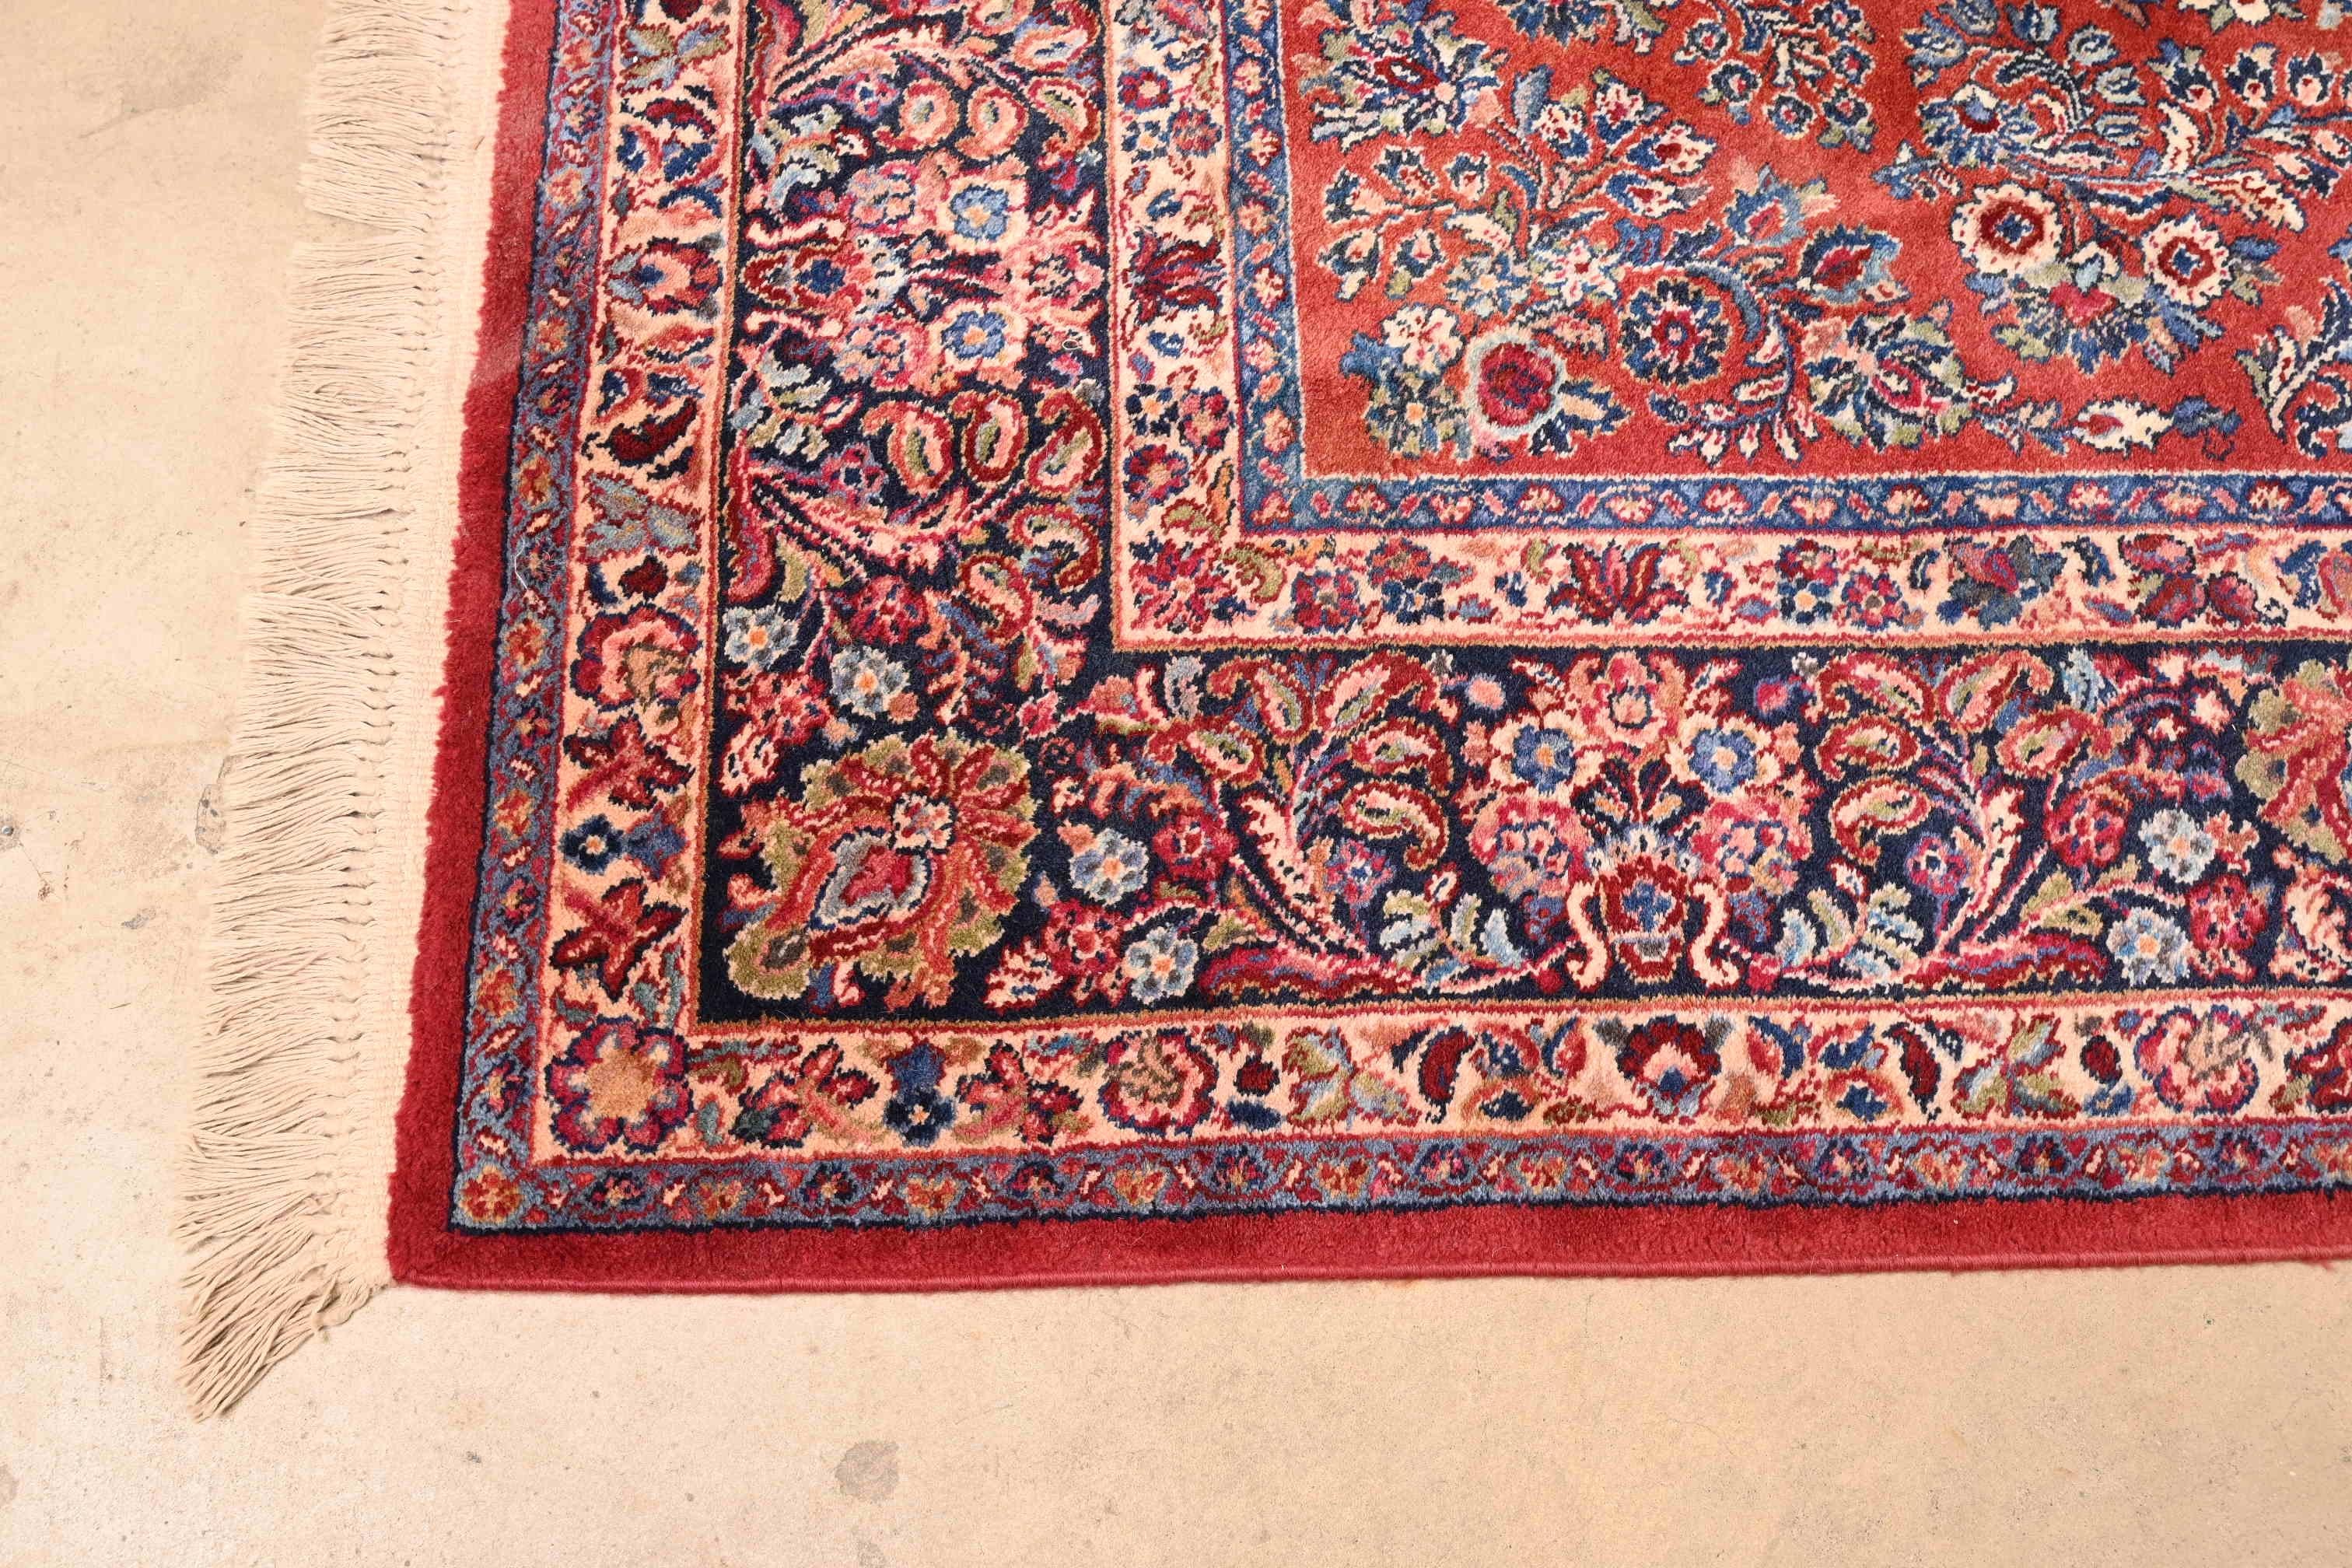 Karastan Sarouk Room Size Wool Rug, circa 1950s In Good Condition For Sale In South Bend, IN